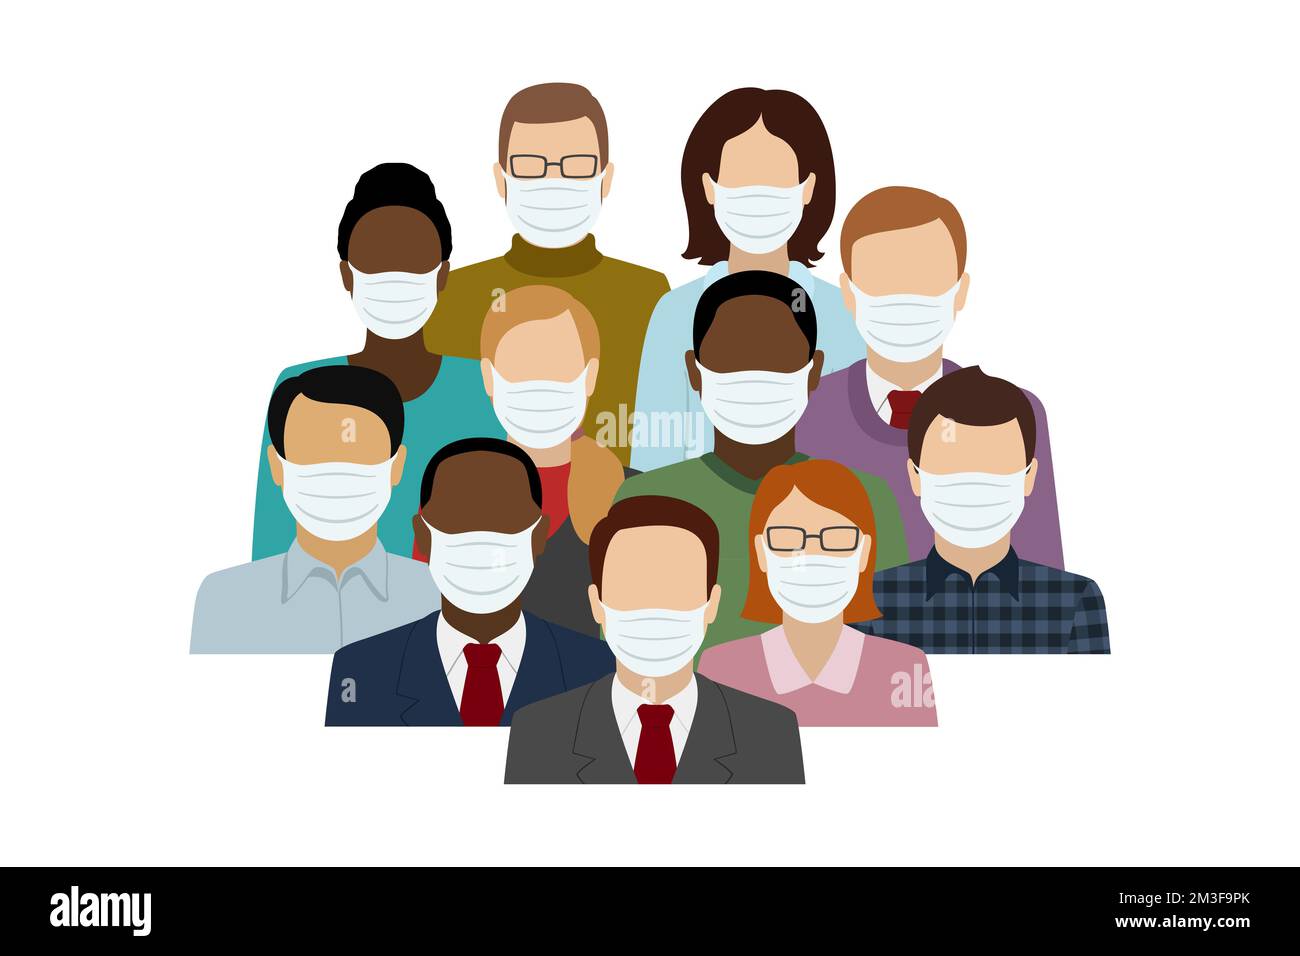 Multiethnic group of people in face masks. Vector illustration. Stock Vector